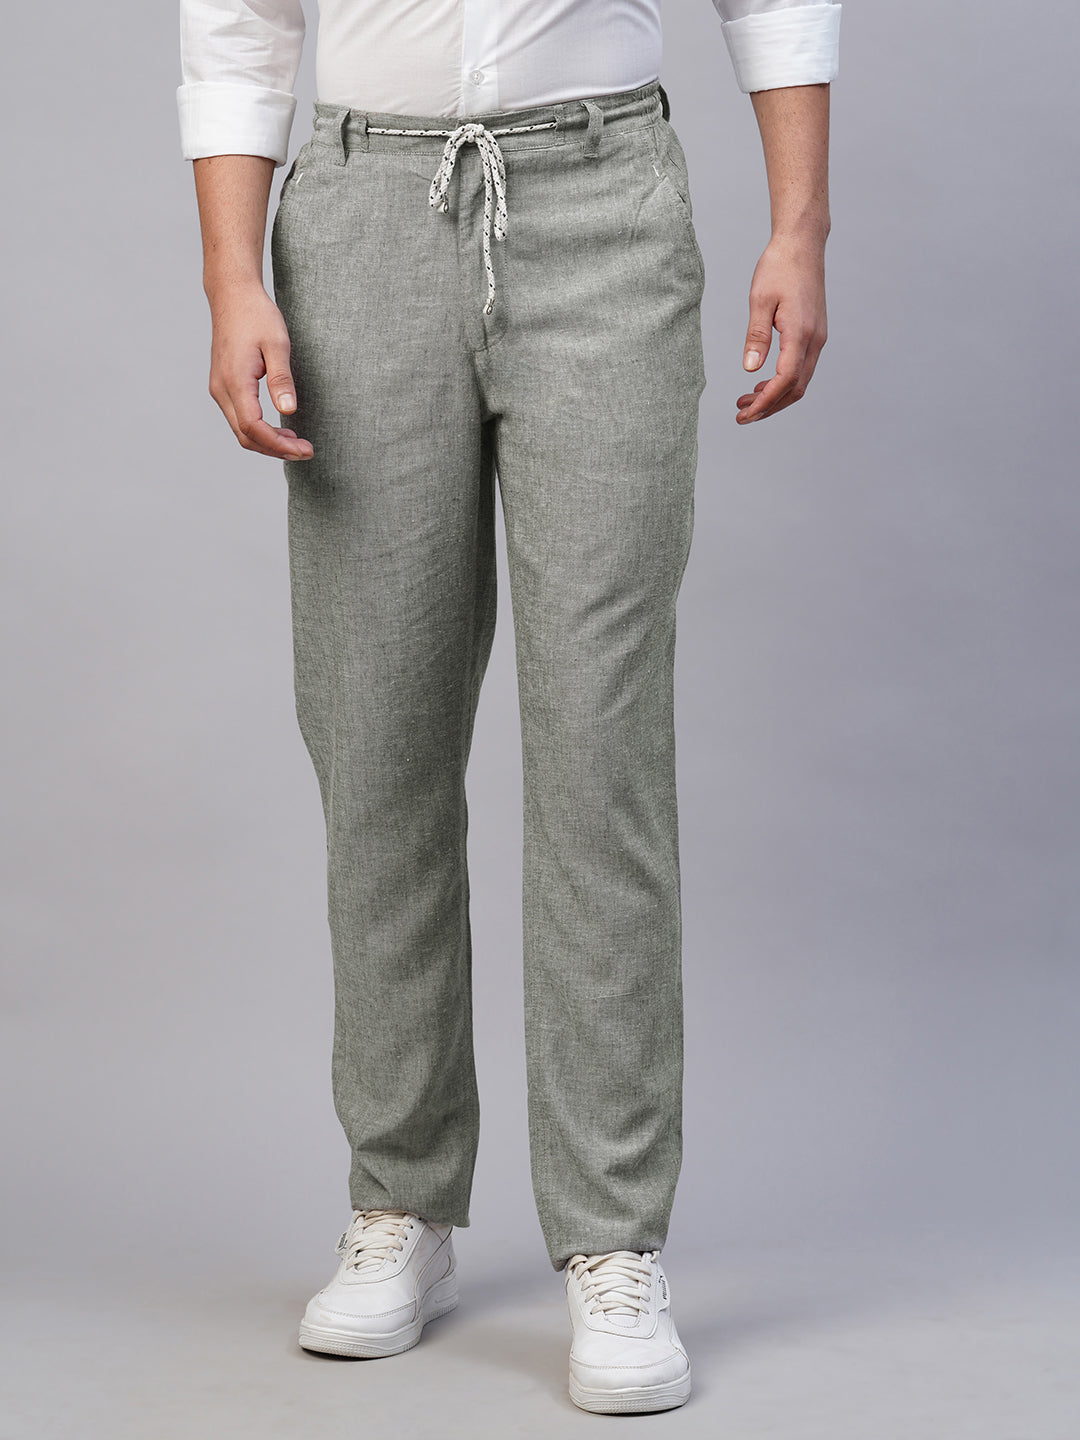 Buy Linen Pants for Men In India at Beyoung  Upto 70 Off